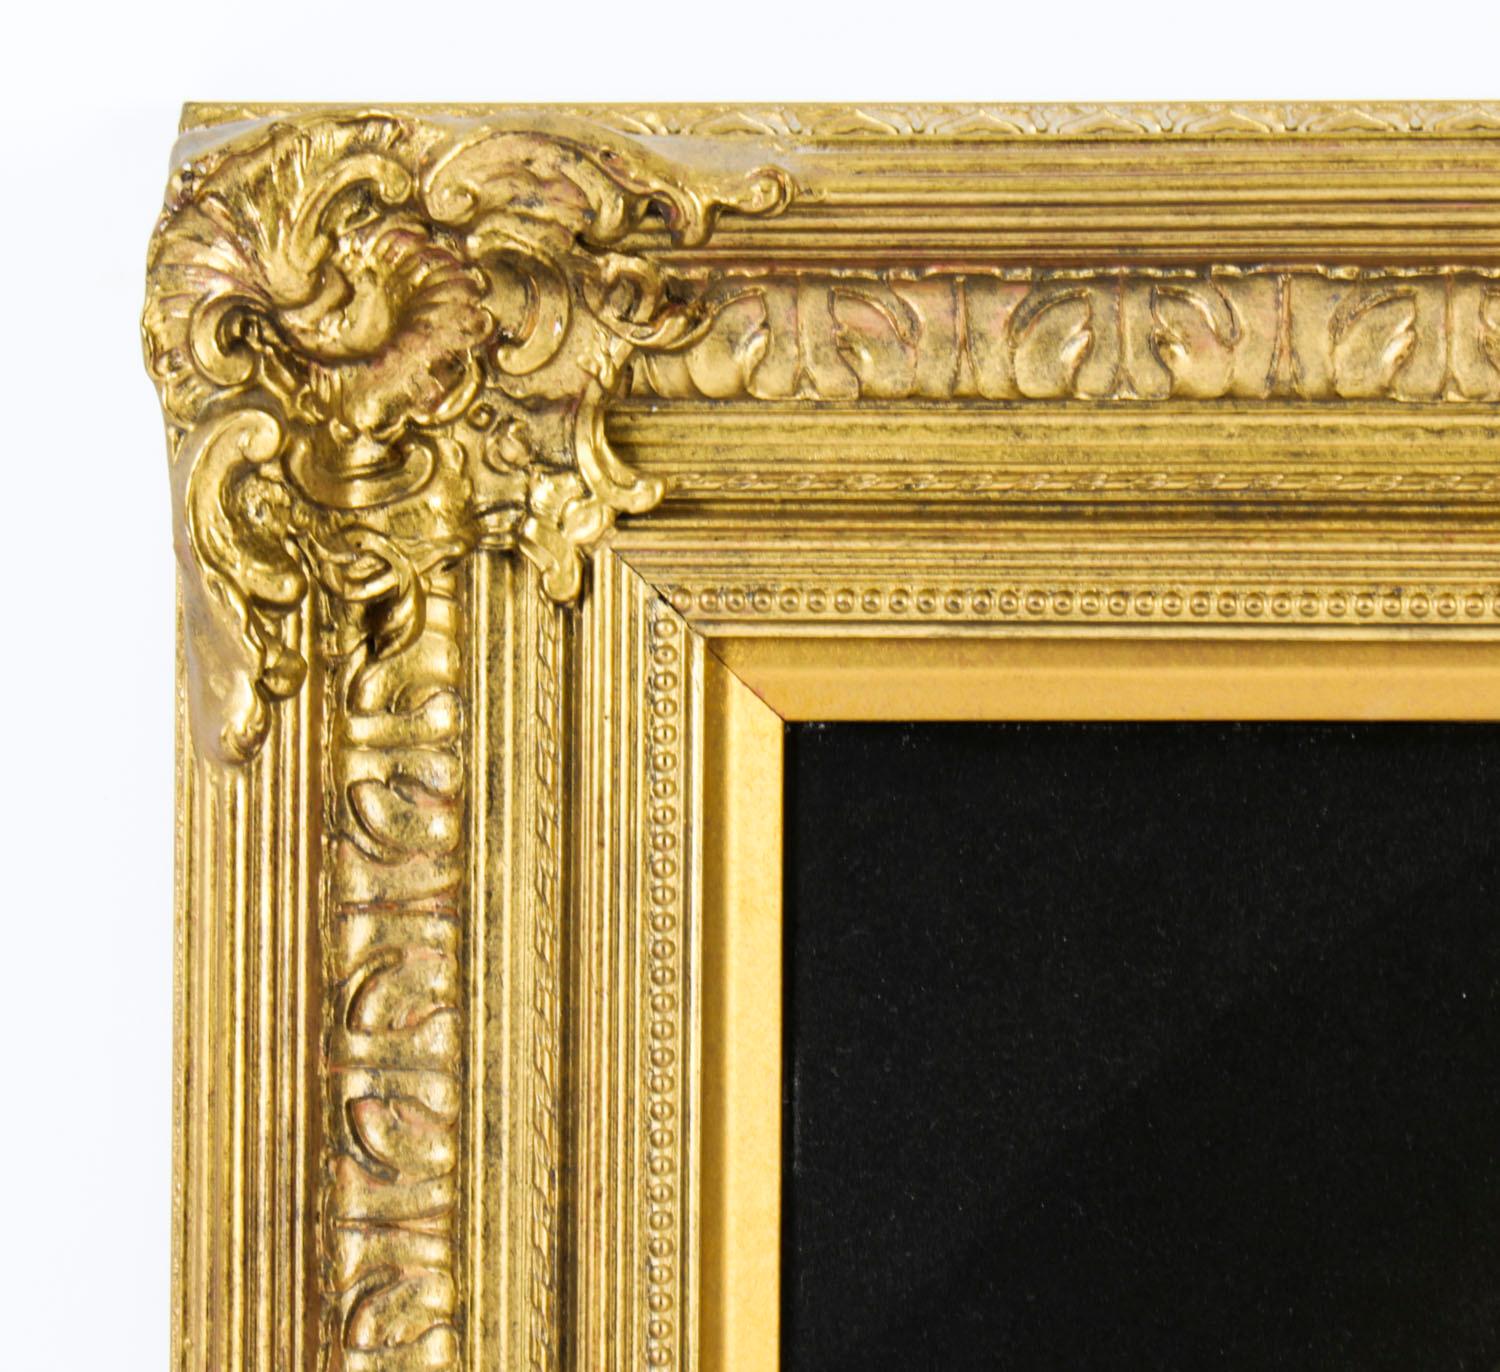 Giltwood Antique Oil Painting, 'Simple Amour' after Constant J Brochart, 19th Century